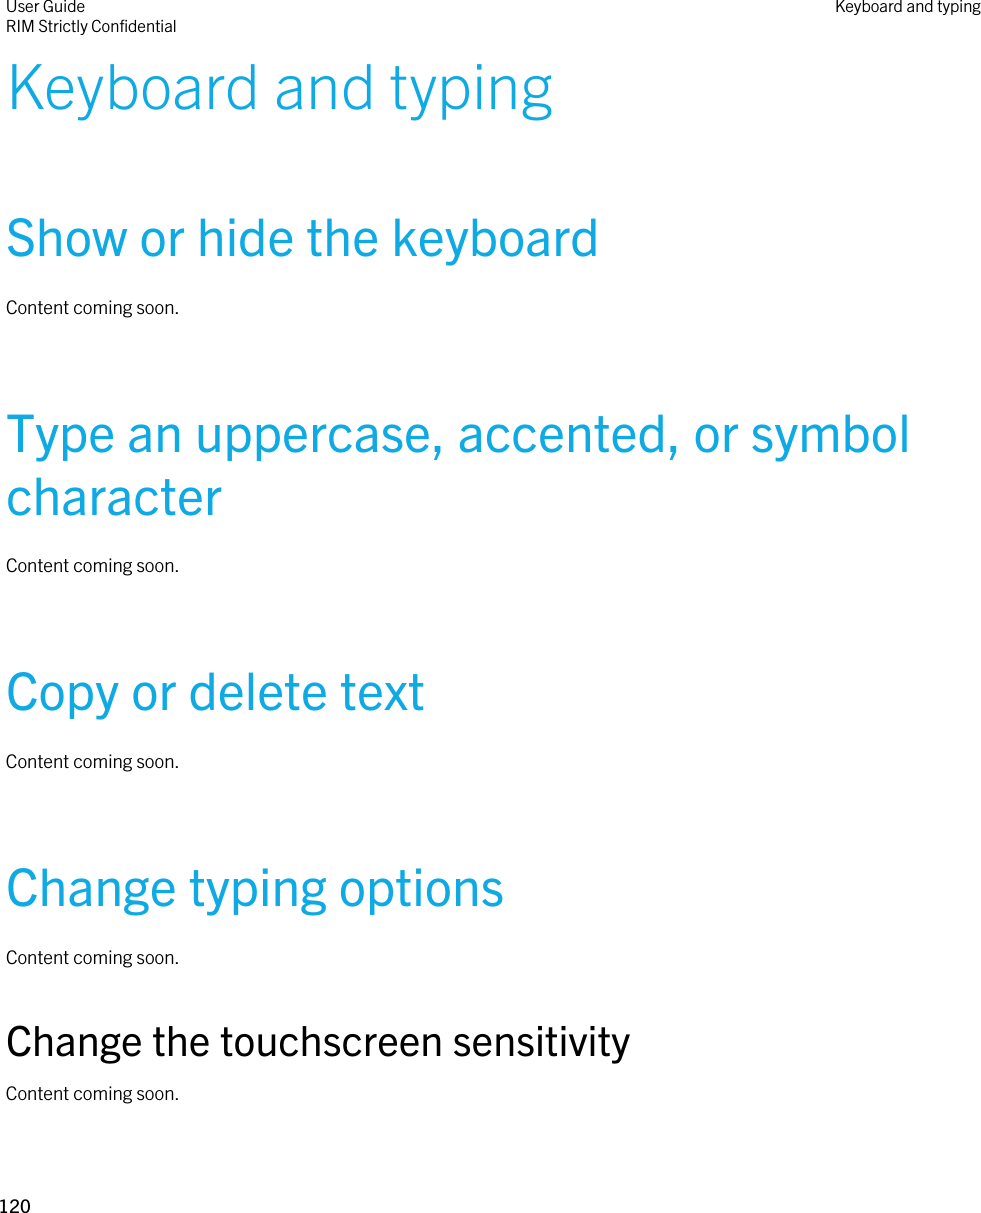 Keyboard and typingShow or hide the keyboardContent coming soon.Type an uppercase, accented, or symbol characterContent coming soon.Copy or delete textContent coming soon.Change typing optionsContent coming soon.Change the touchscreen sensitivityContent coming soon.User GuideRIM Strictly ConfidentialKeyboard and typing120 